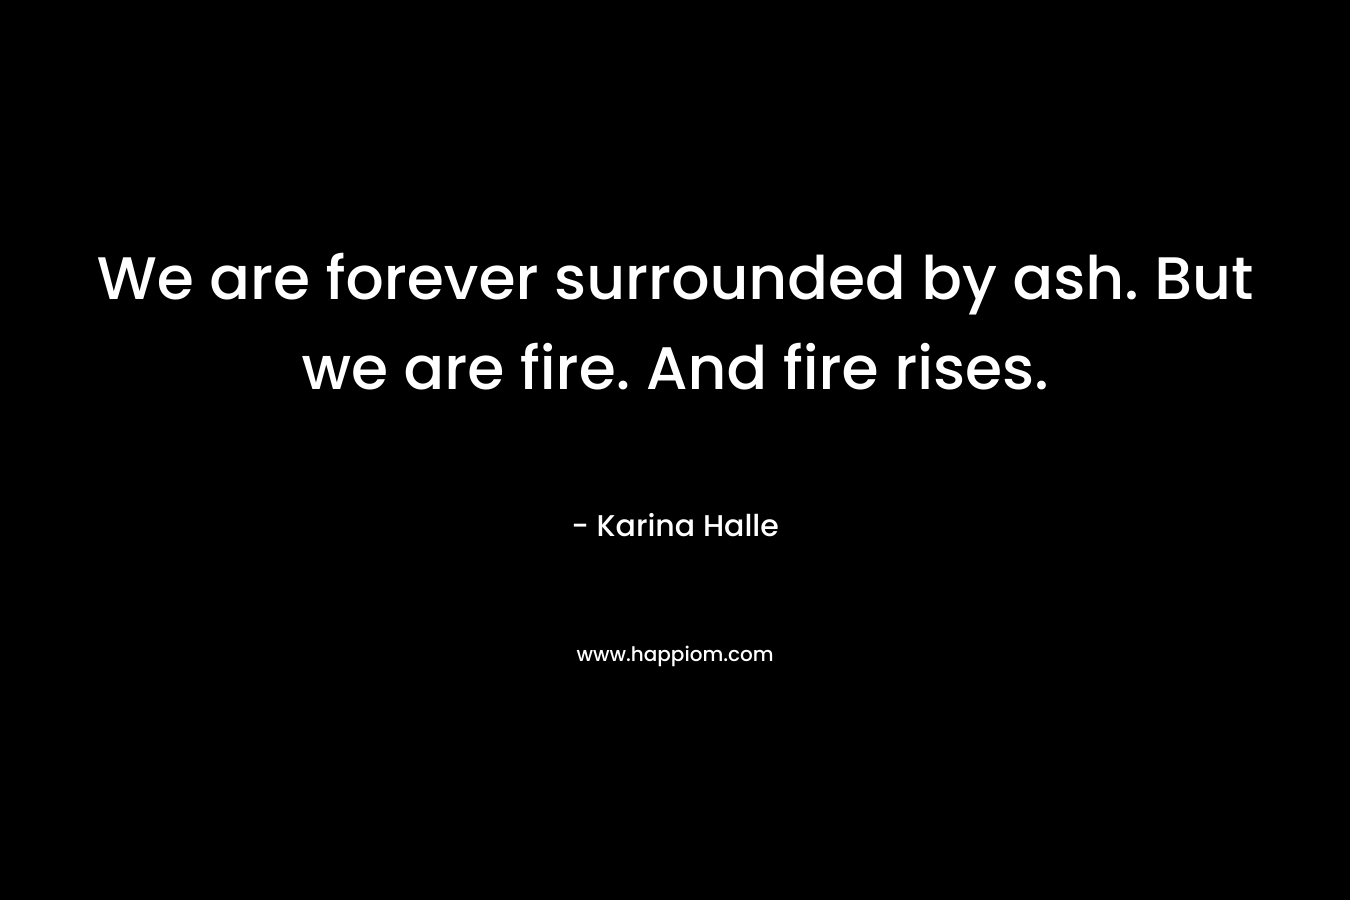 We are forever surrounded by ash. But we are fire. And fire rises.